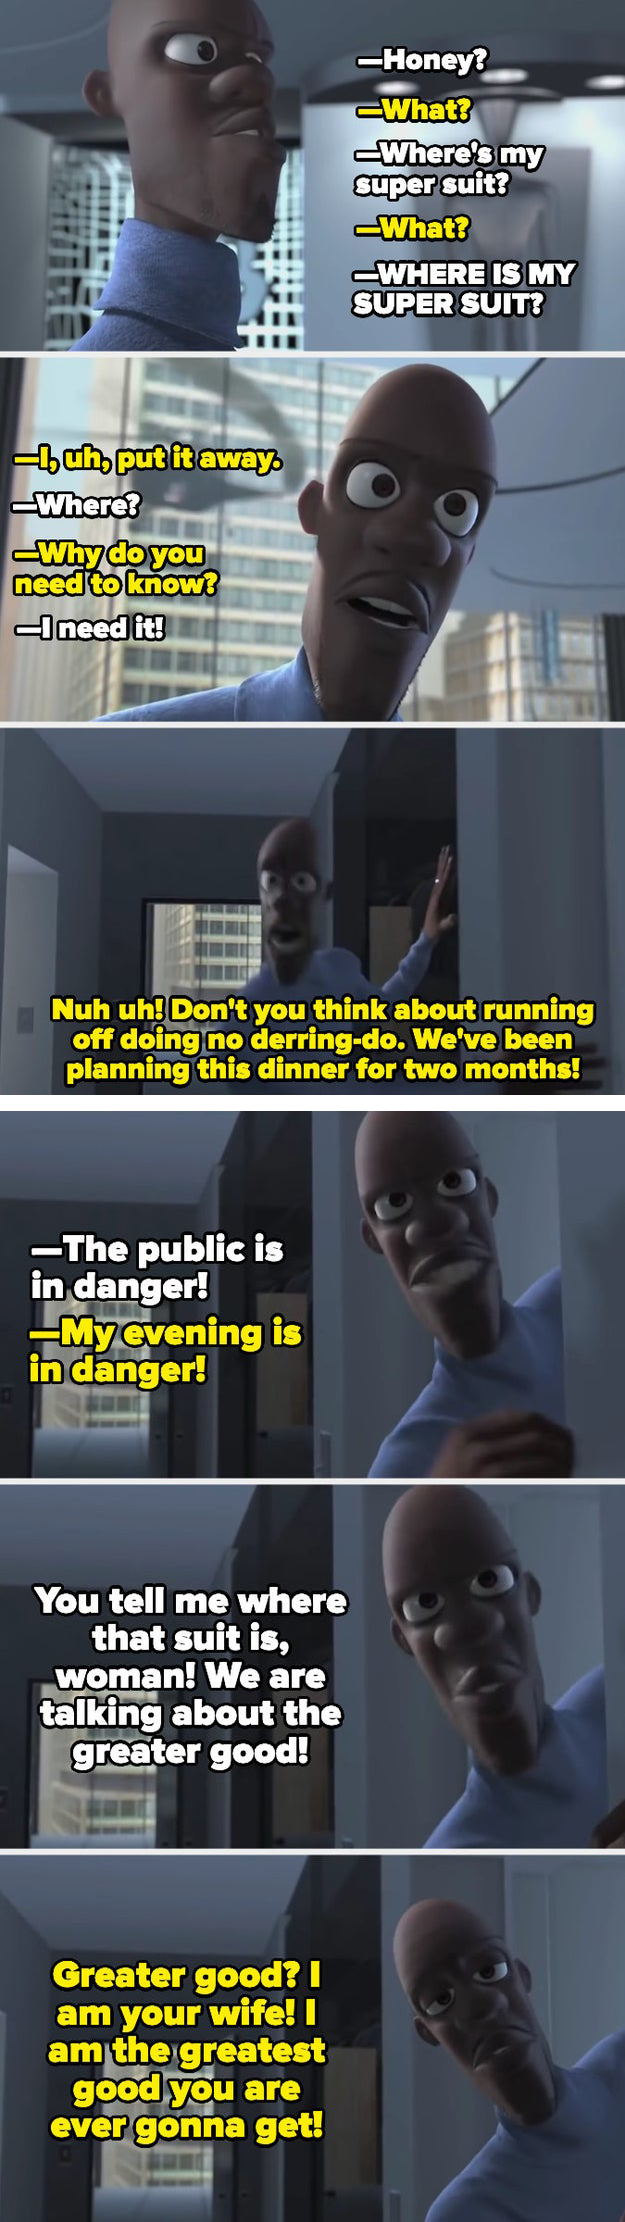 Honey yells at Frozone for running off to save lives and not thinking about their date night plans